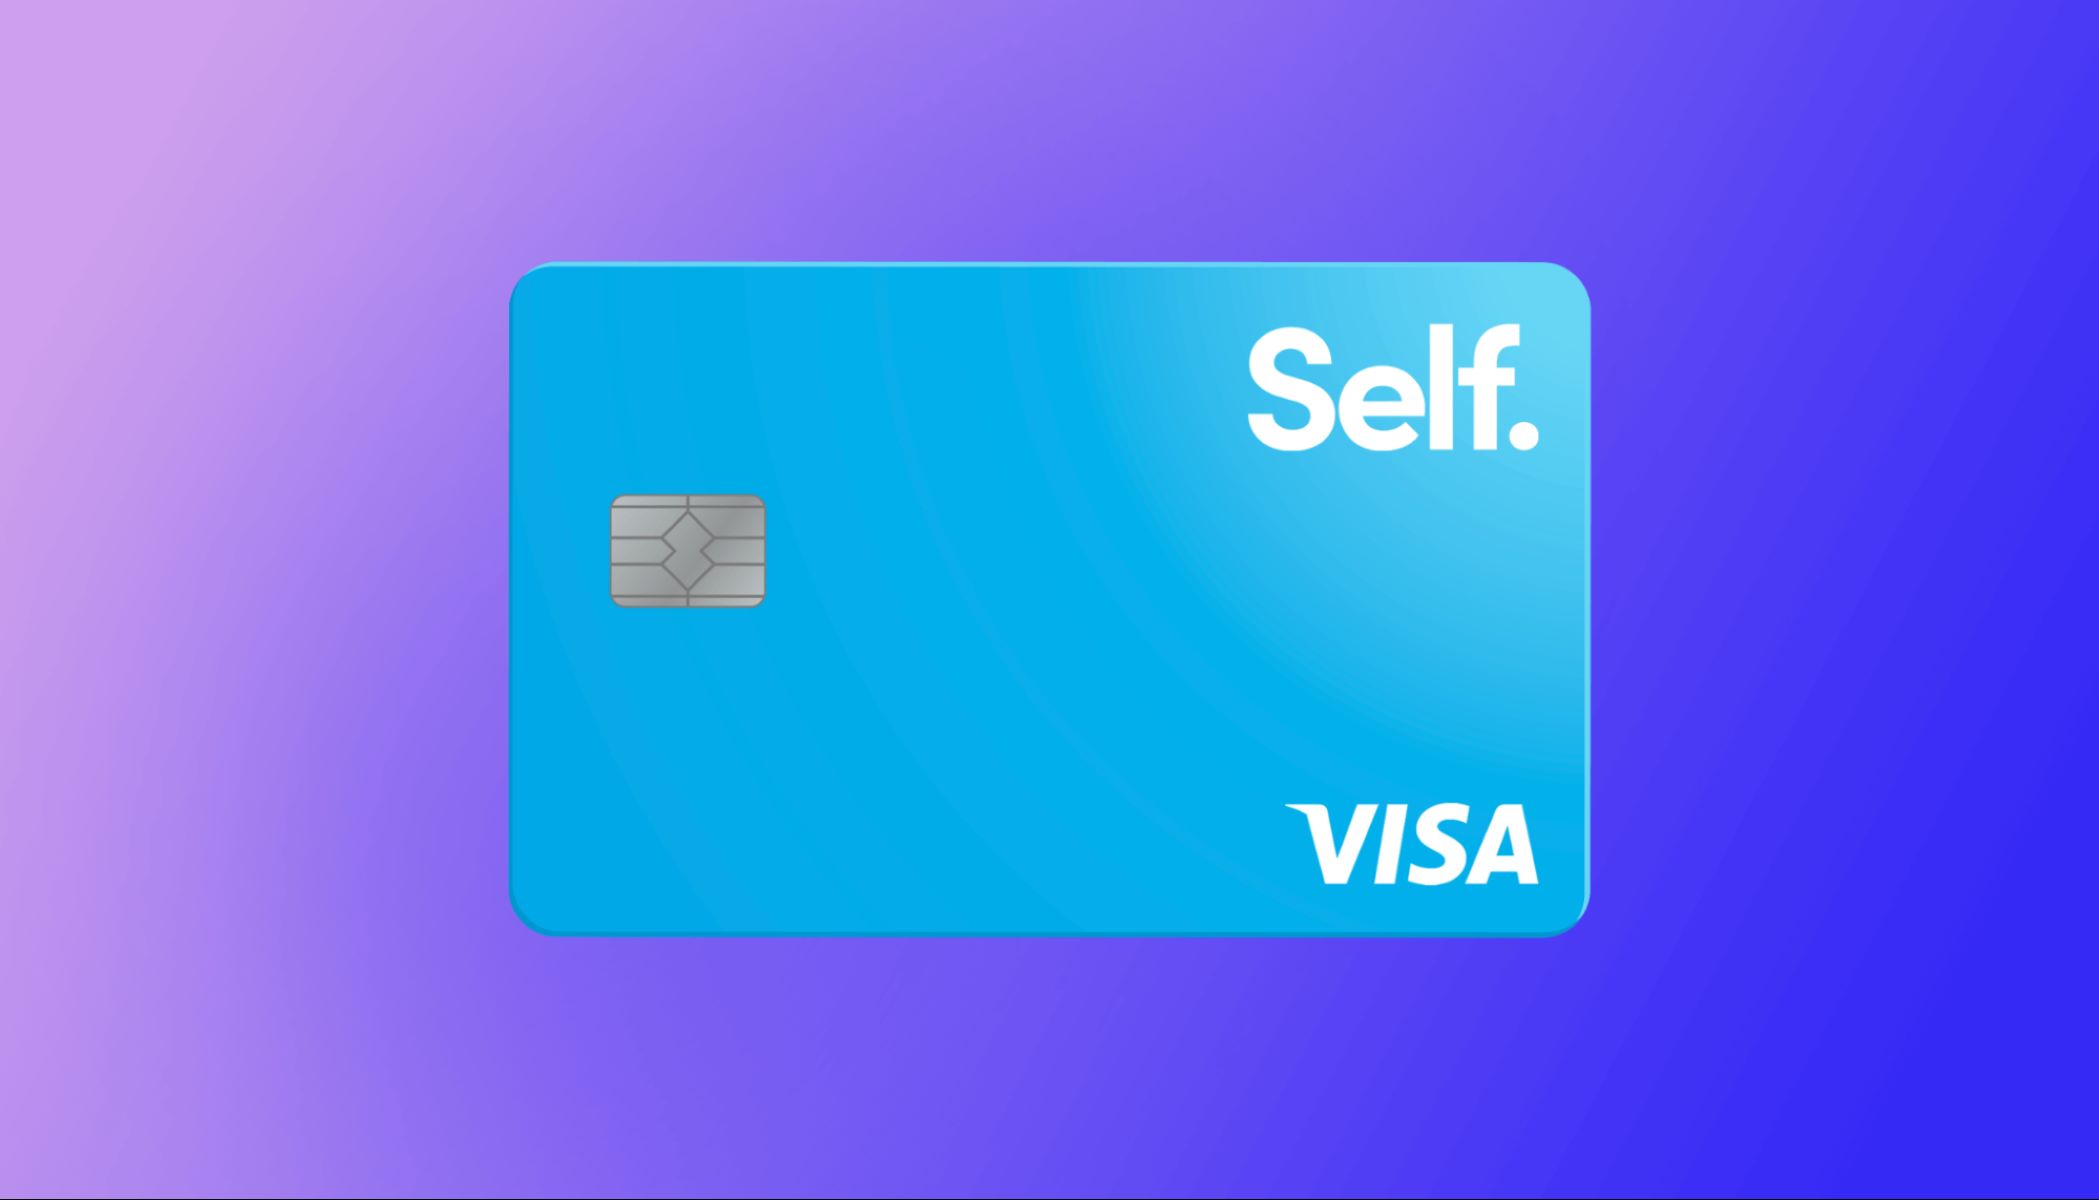 How To Order A New Self Credit Card